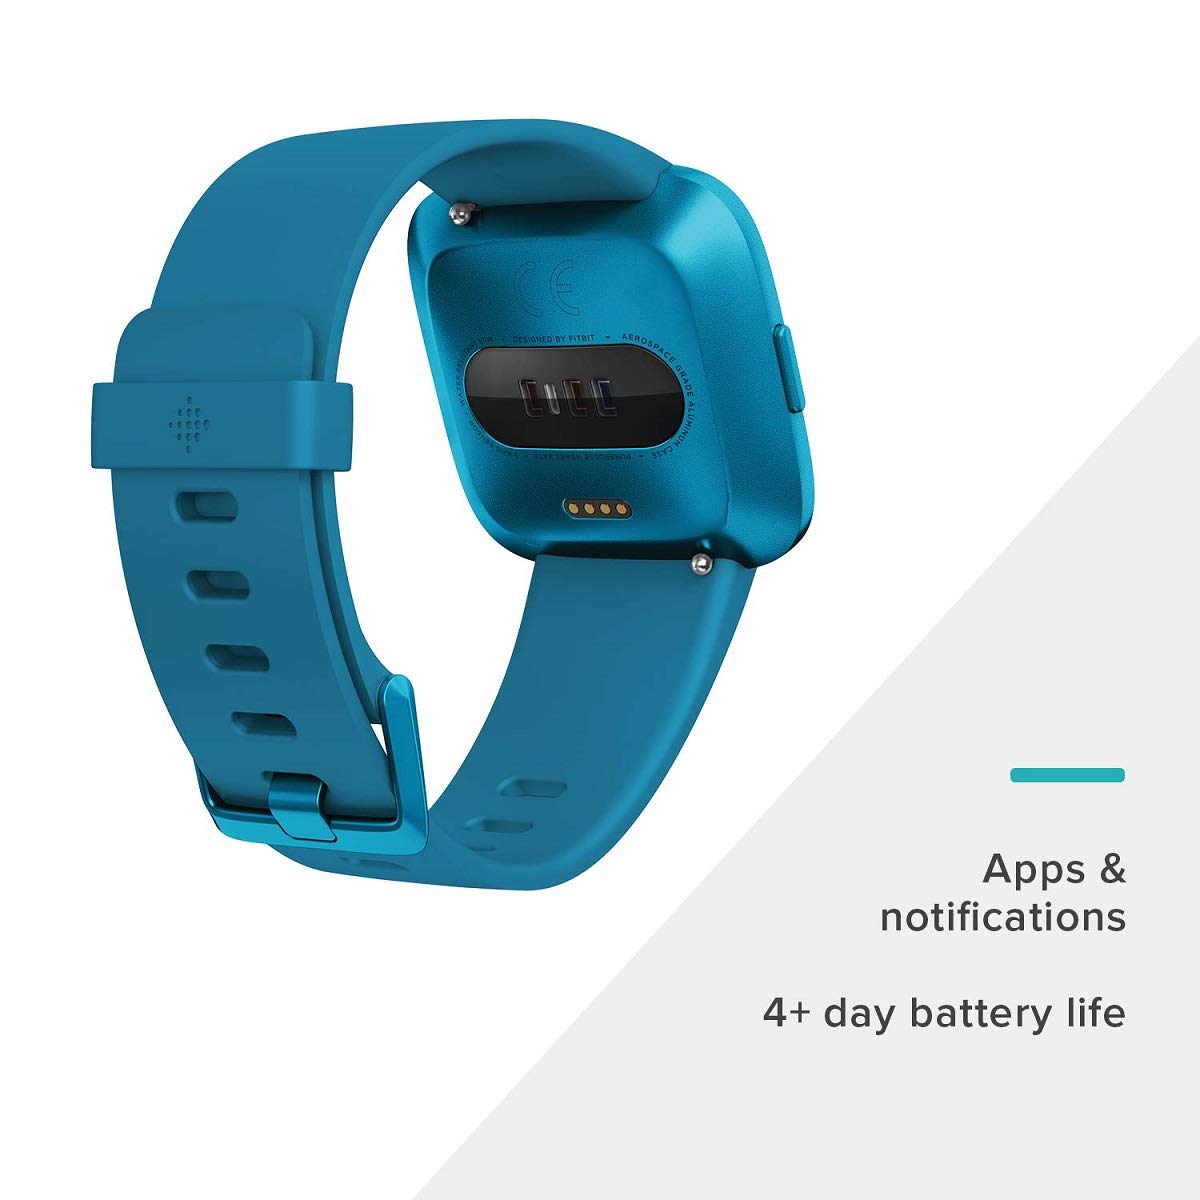 Fitbit Versa Lite Edition Smart Watch, One Size (S and L Bands Included)